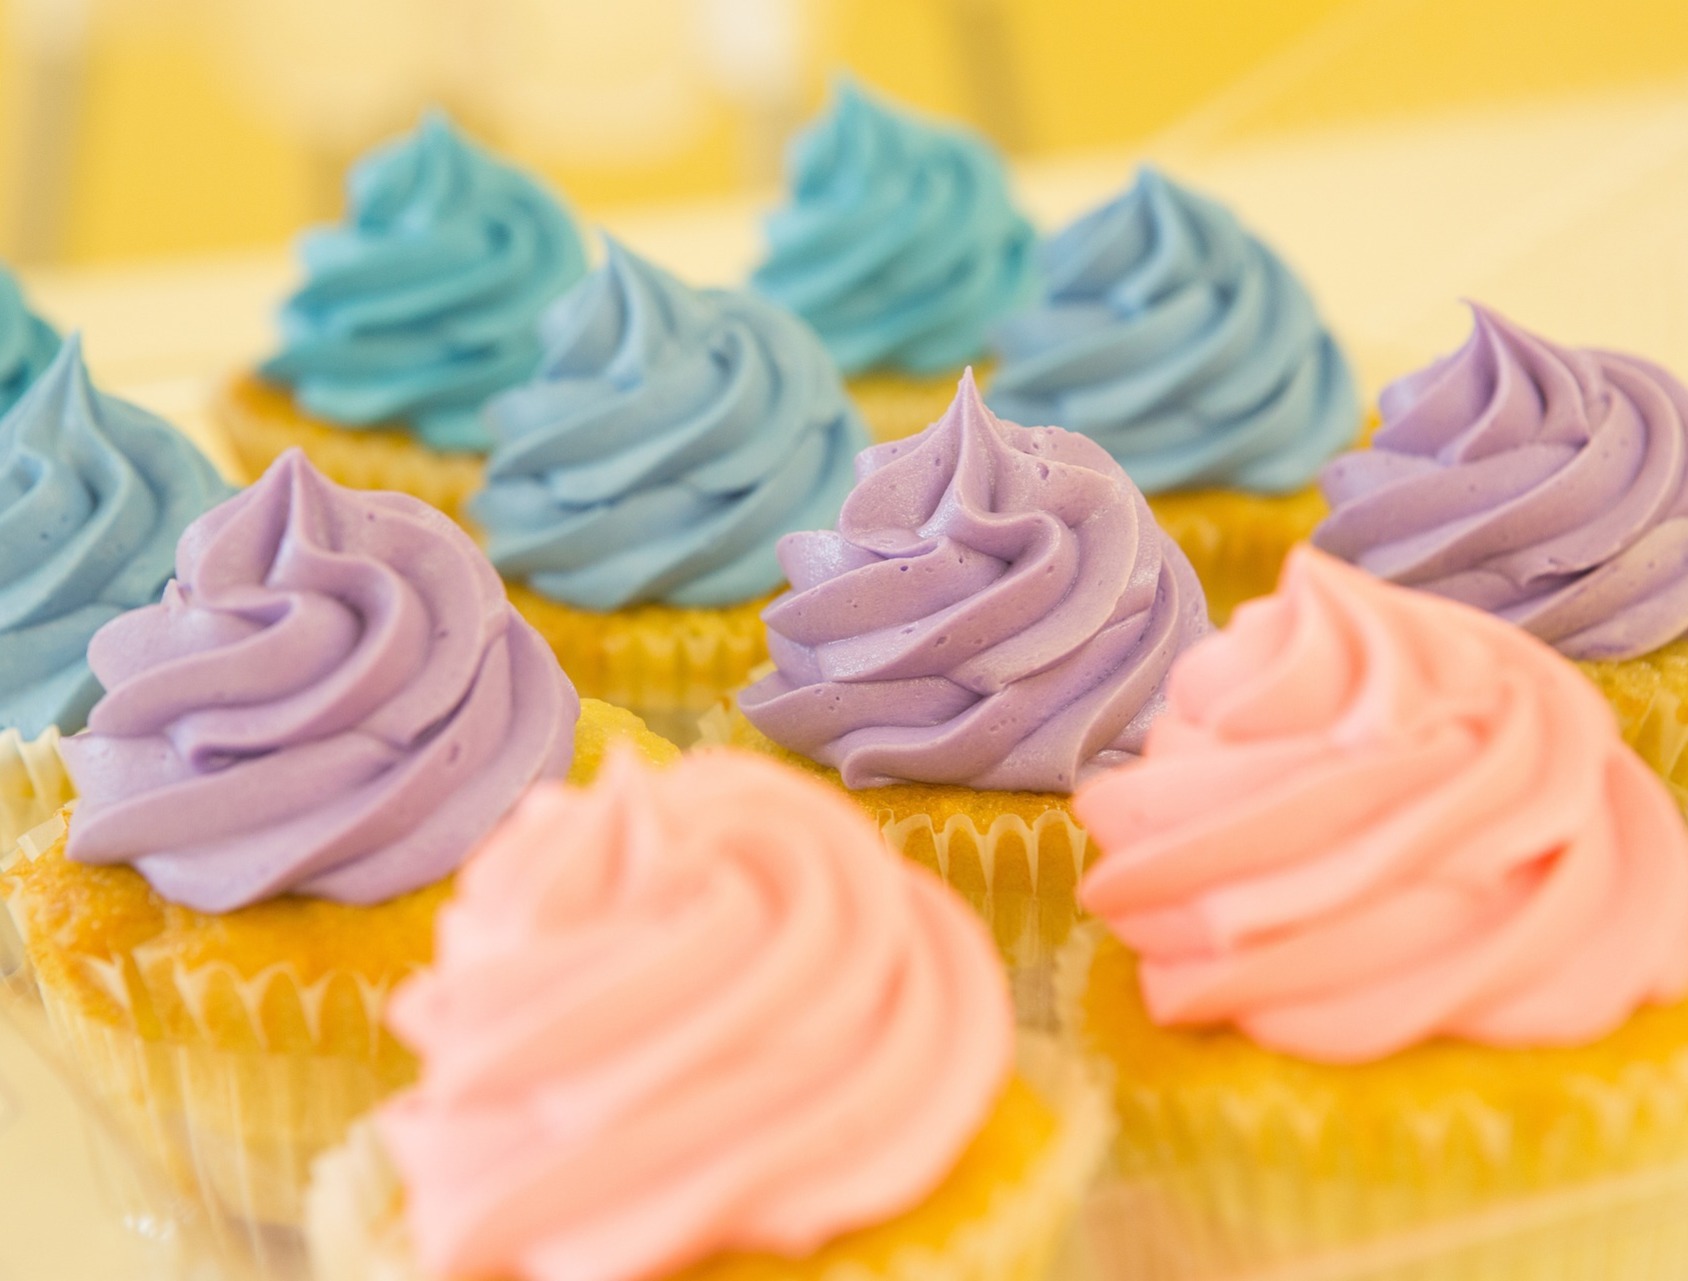 A selection of cupcakes, with pink, purple and blue frosting.  Our No Win No Fee Solicitors deal with gluten allergy compensation claims due to undisclosed gluten in cakes.